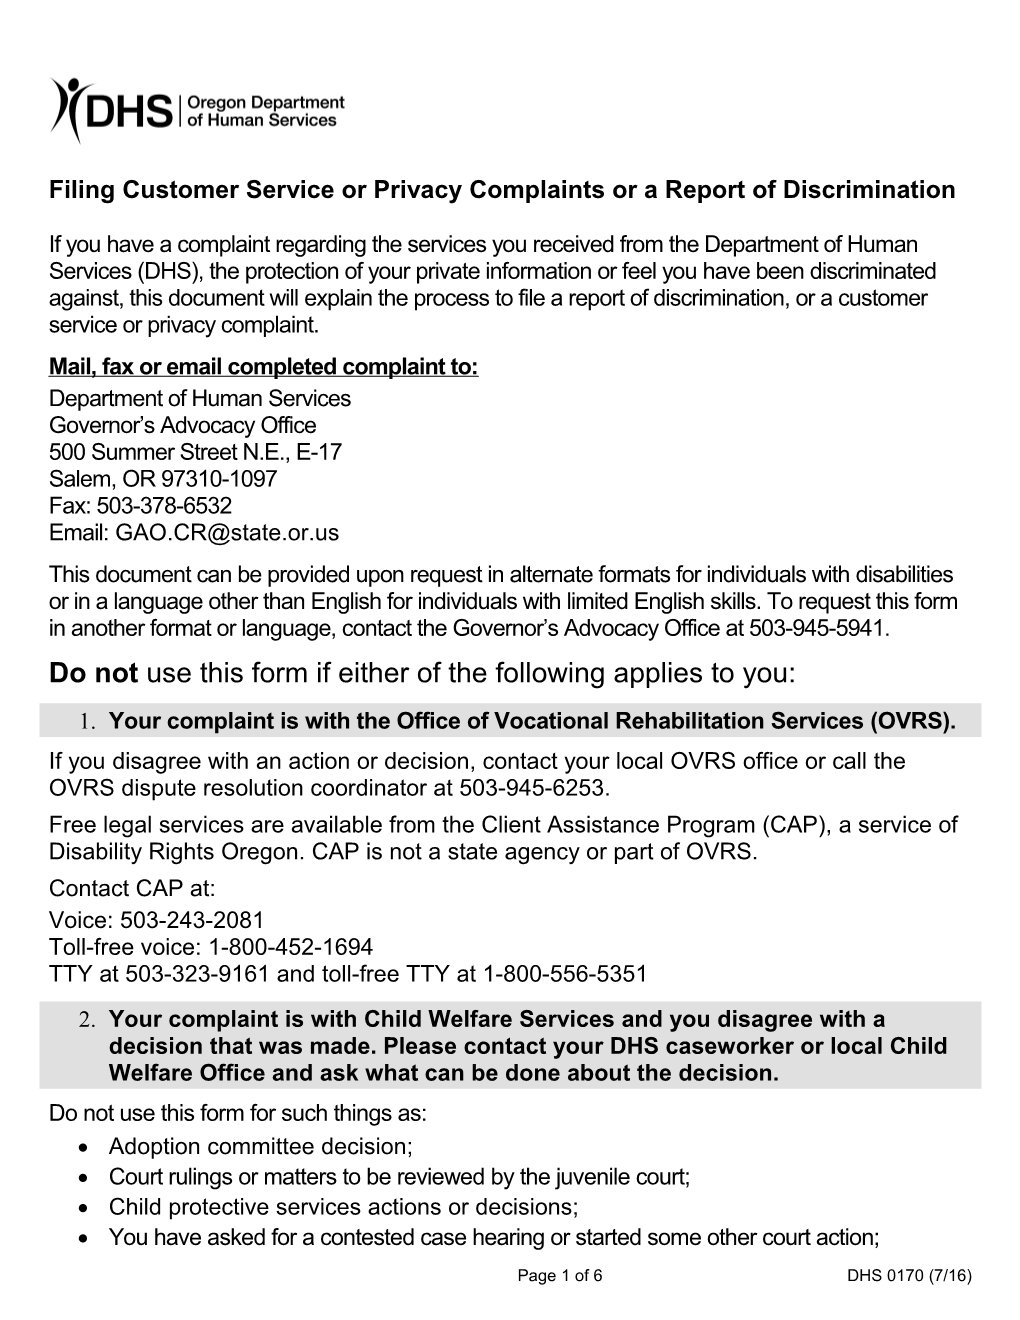 Filing a Customer Service Complaint Or Report of Discrimination